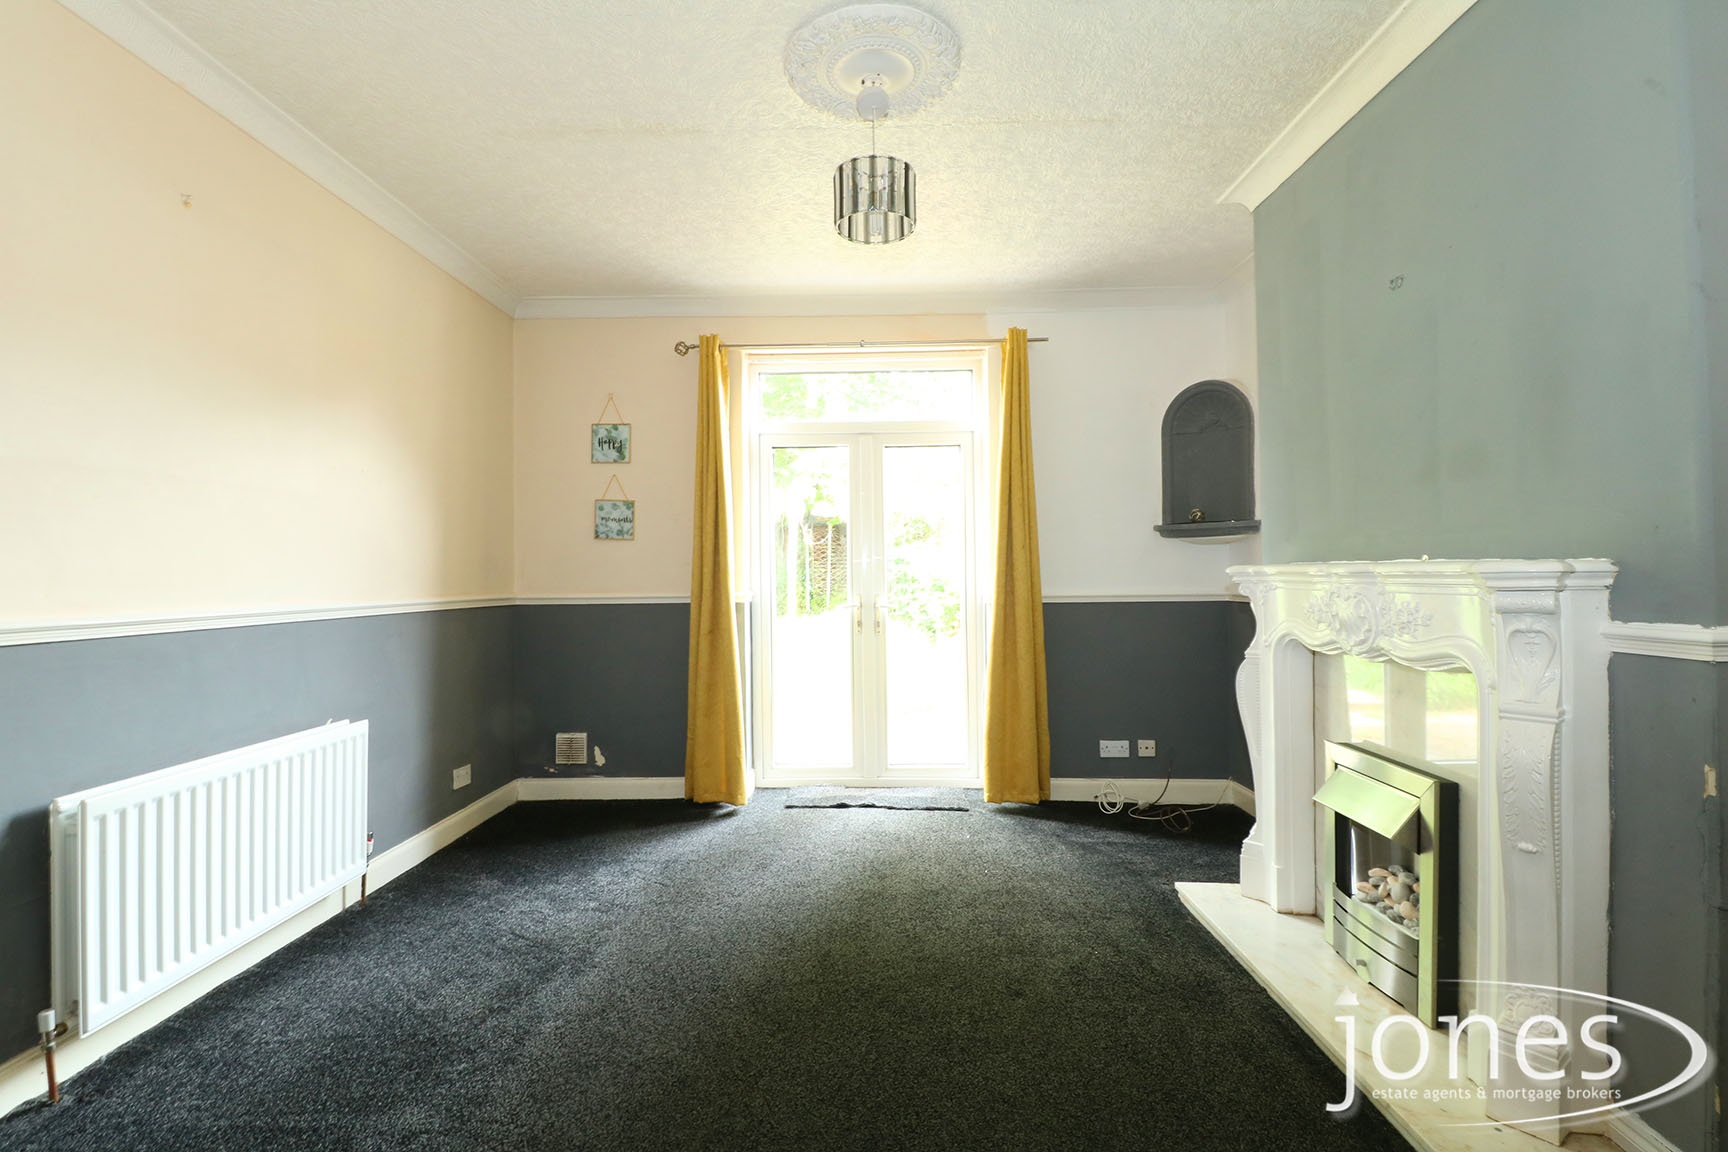 Home for Sale Let - Photo 02 Leven Road, Norton, Stockton on Tees, TS20 1DB